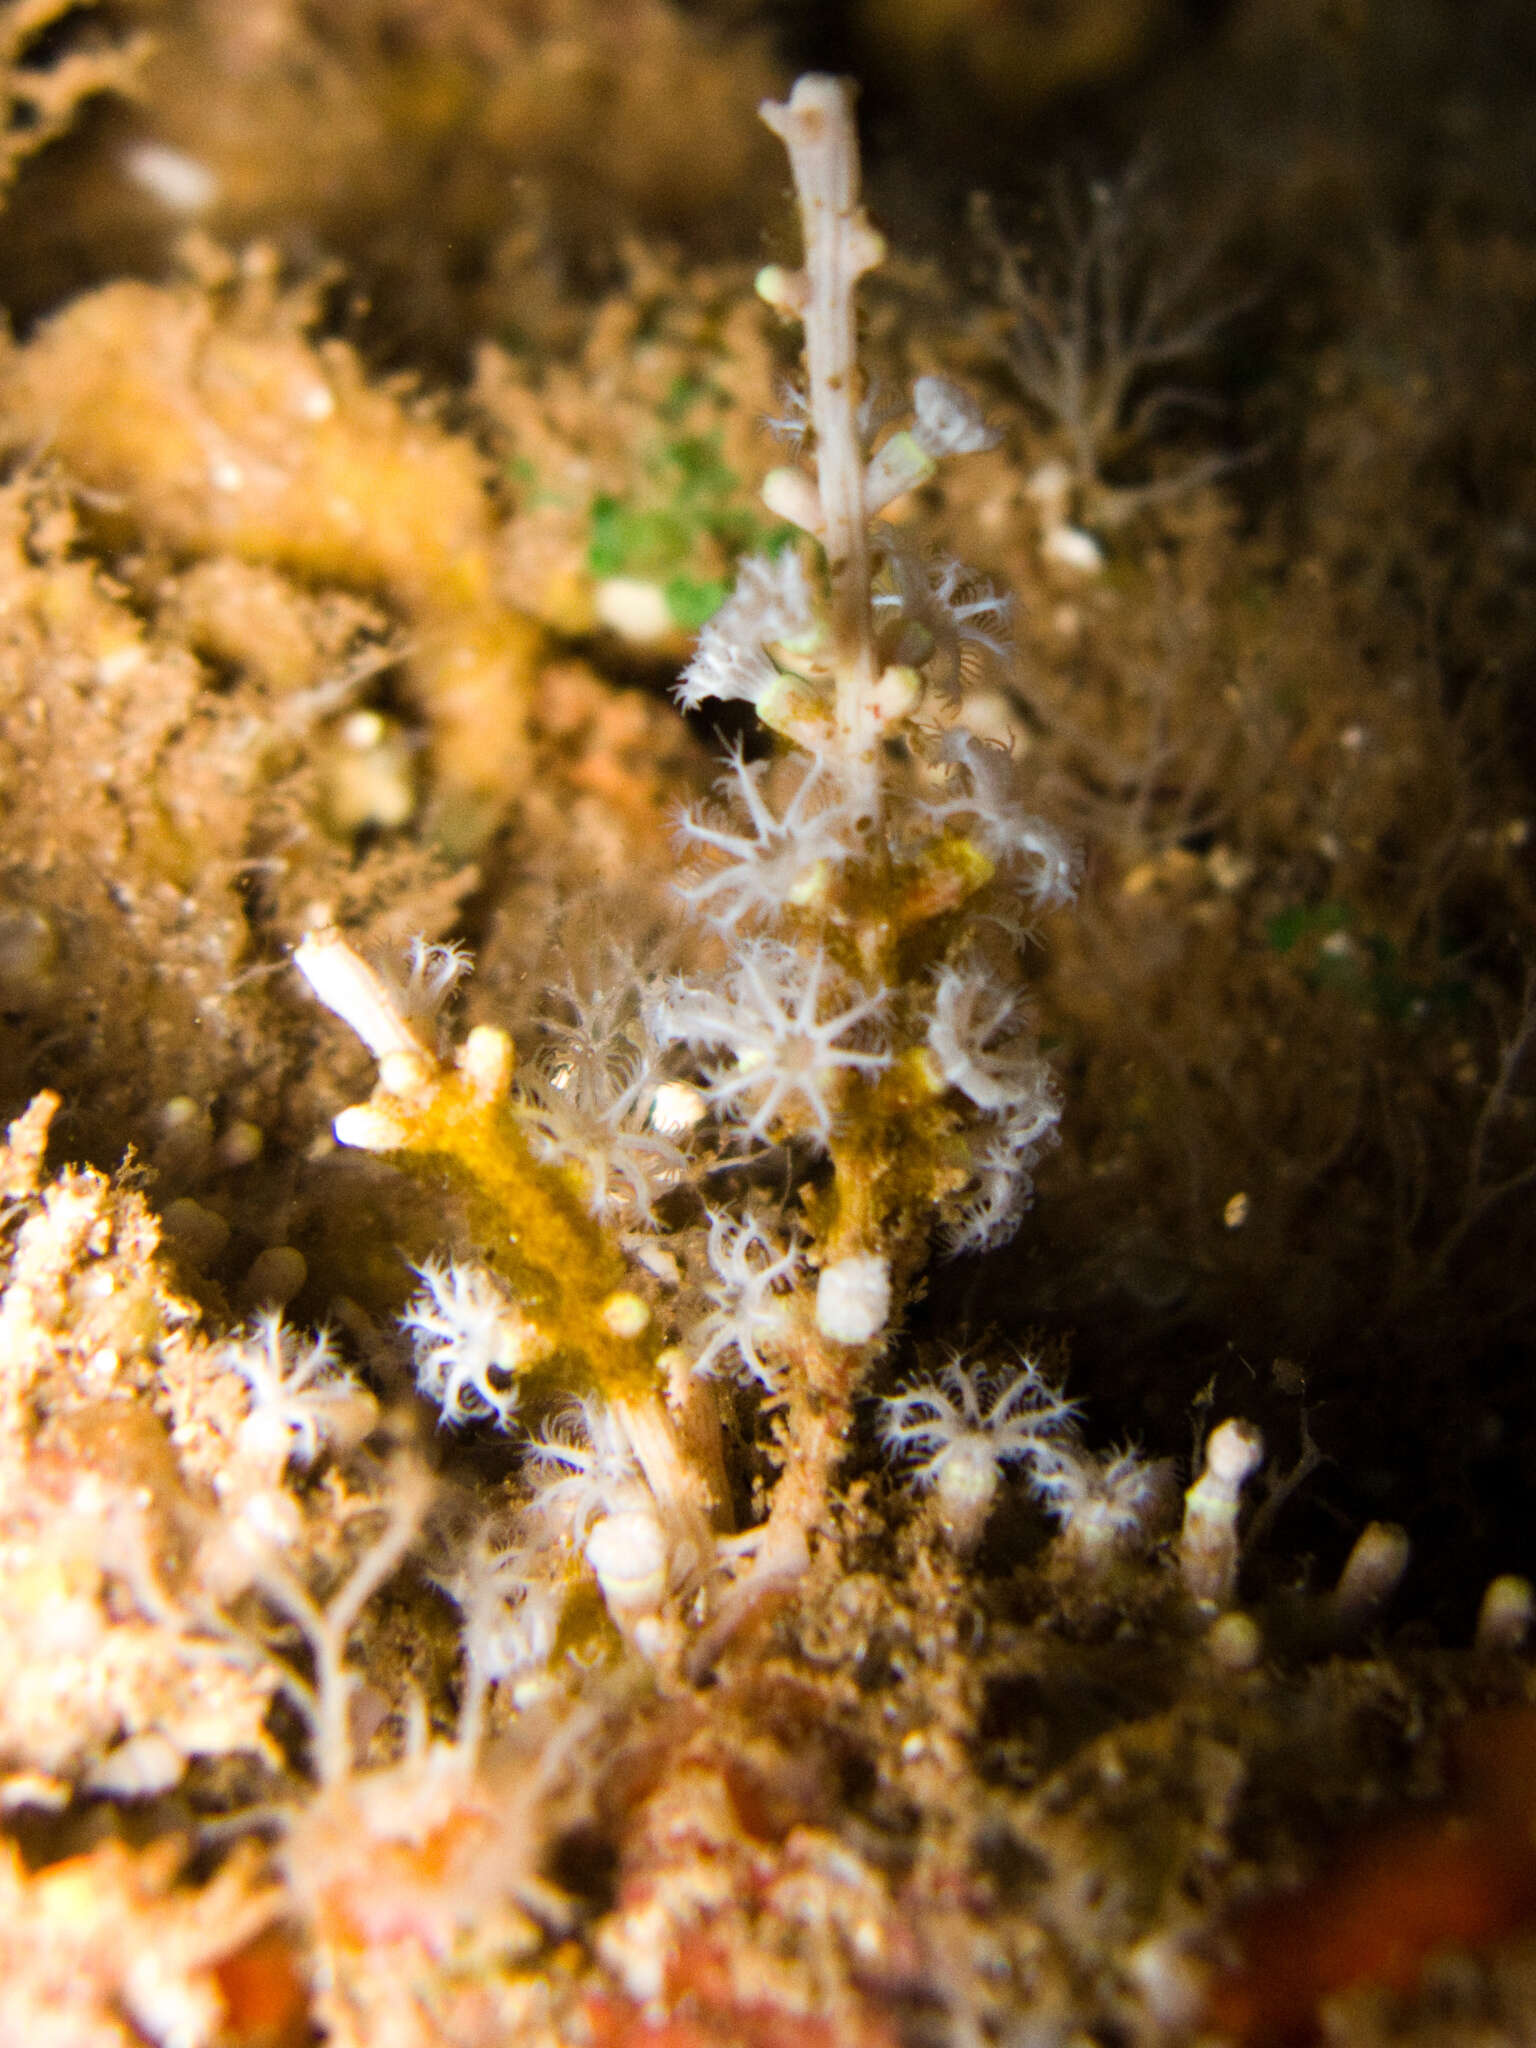 Image of Fouling soft coral